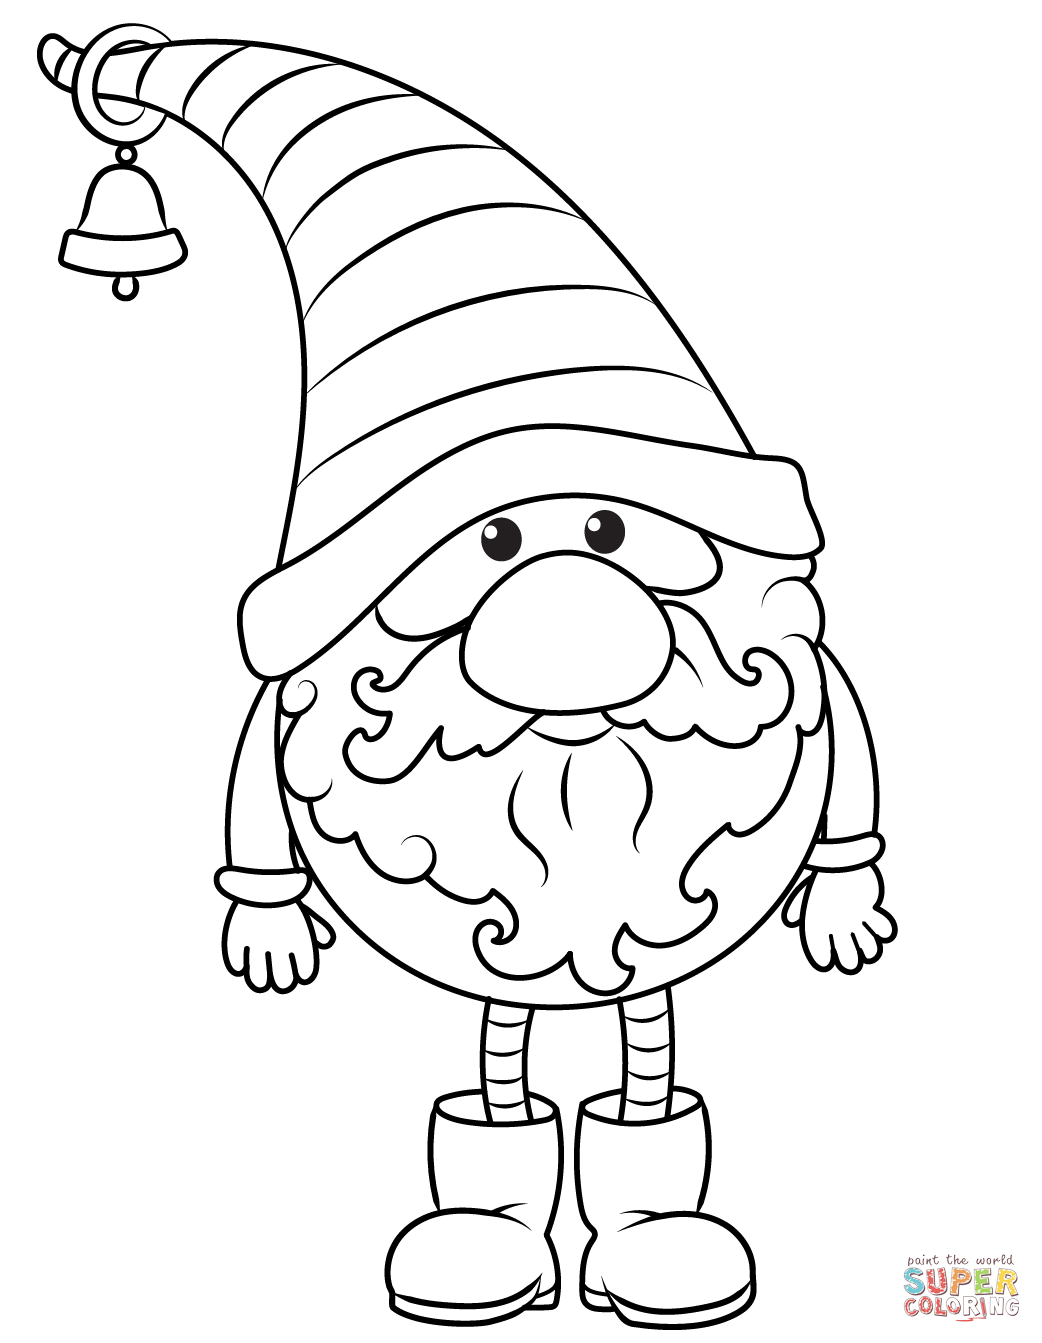 Christmas gnome coloring page free printable coloring pages